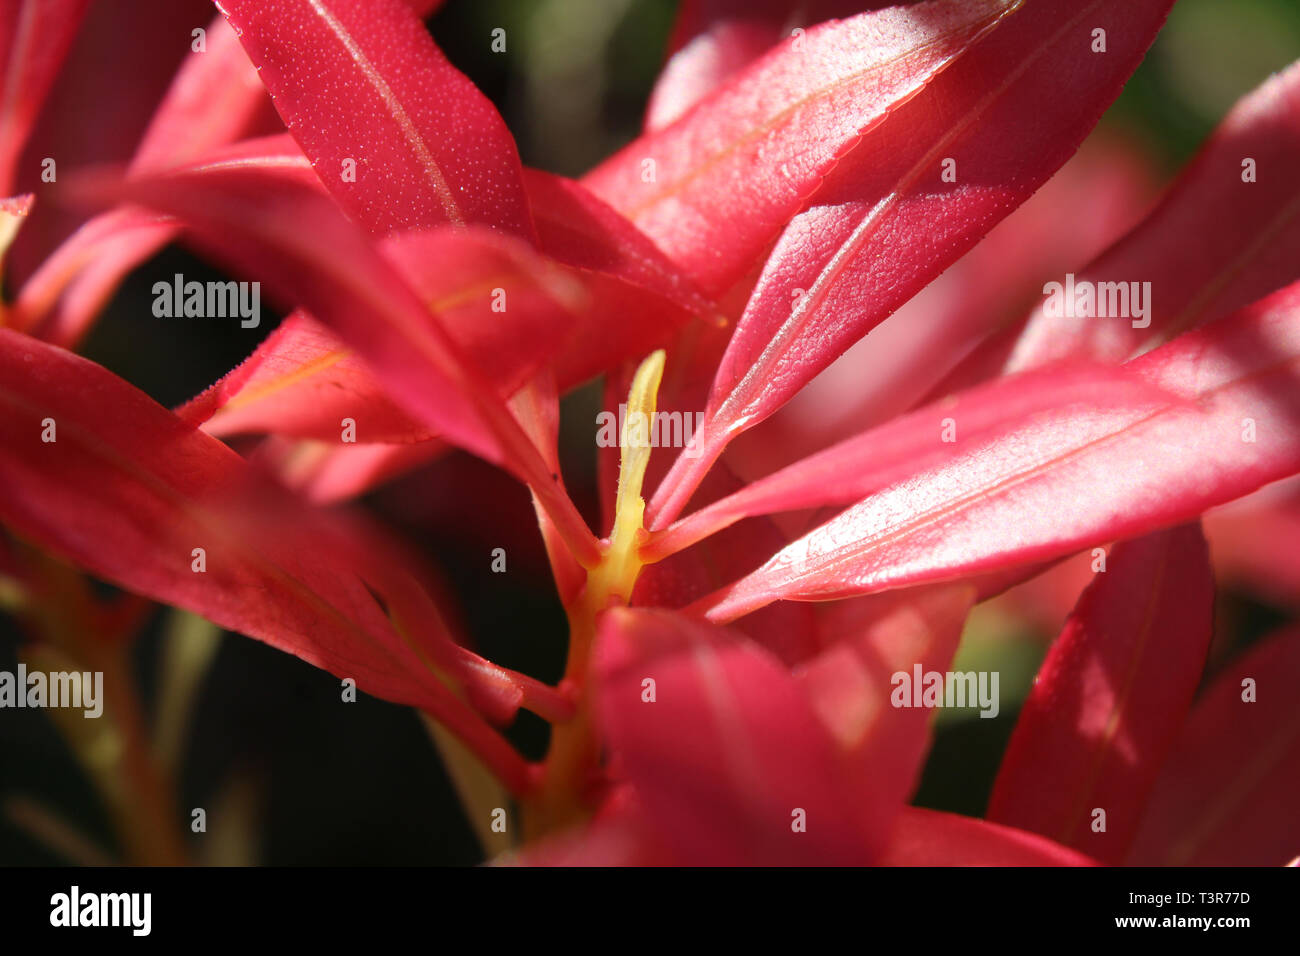 Abstract bright pink new spring growth of the Pieris japonica plant, also known as Flame of the Forest or Lilly of the Valley plant. Stock Photo